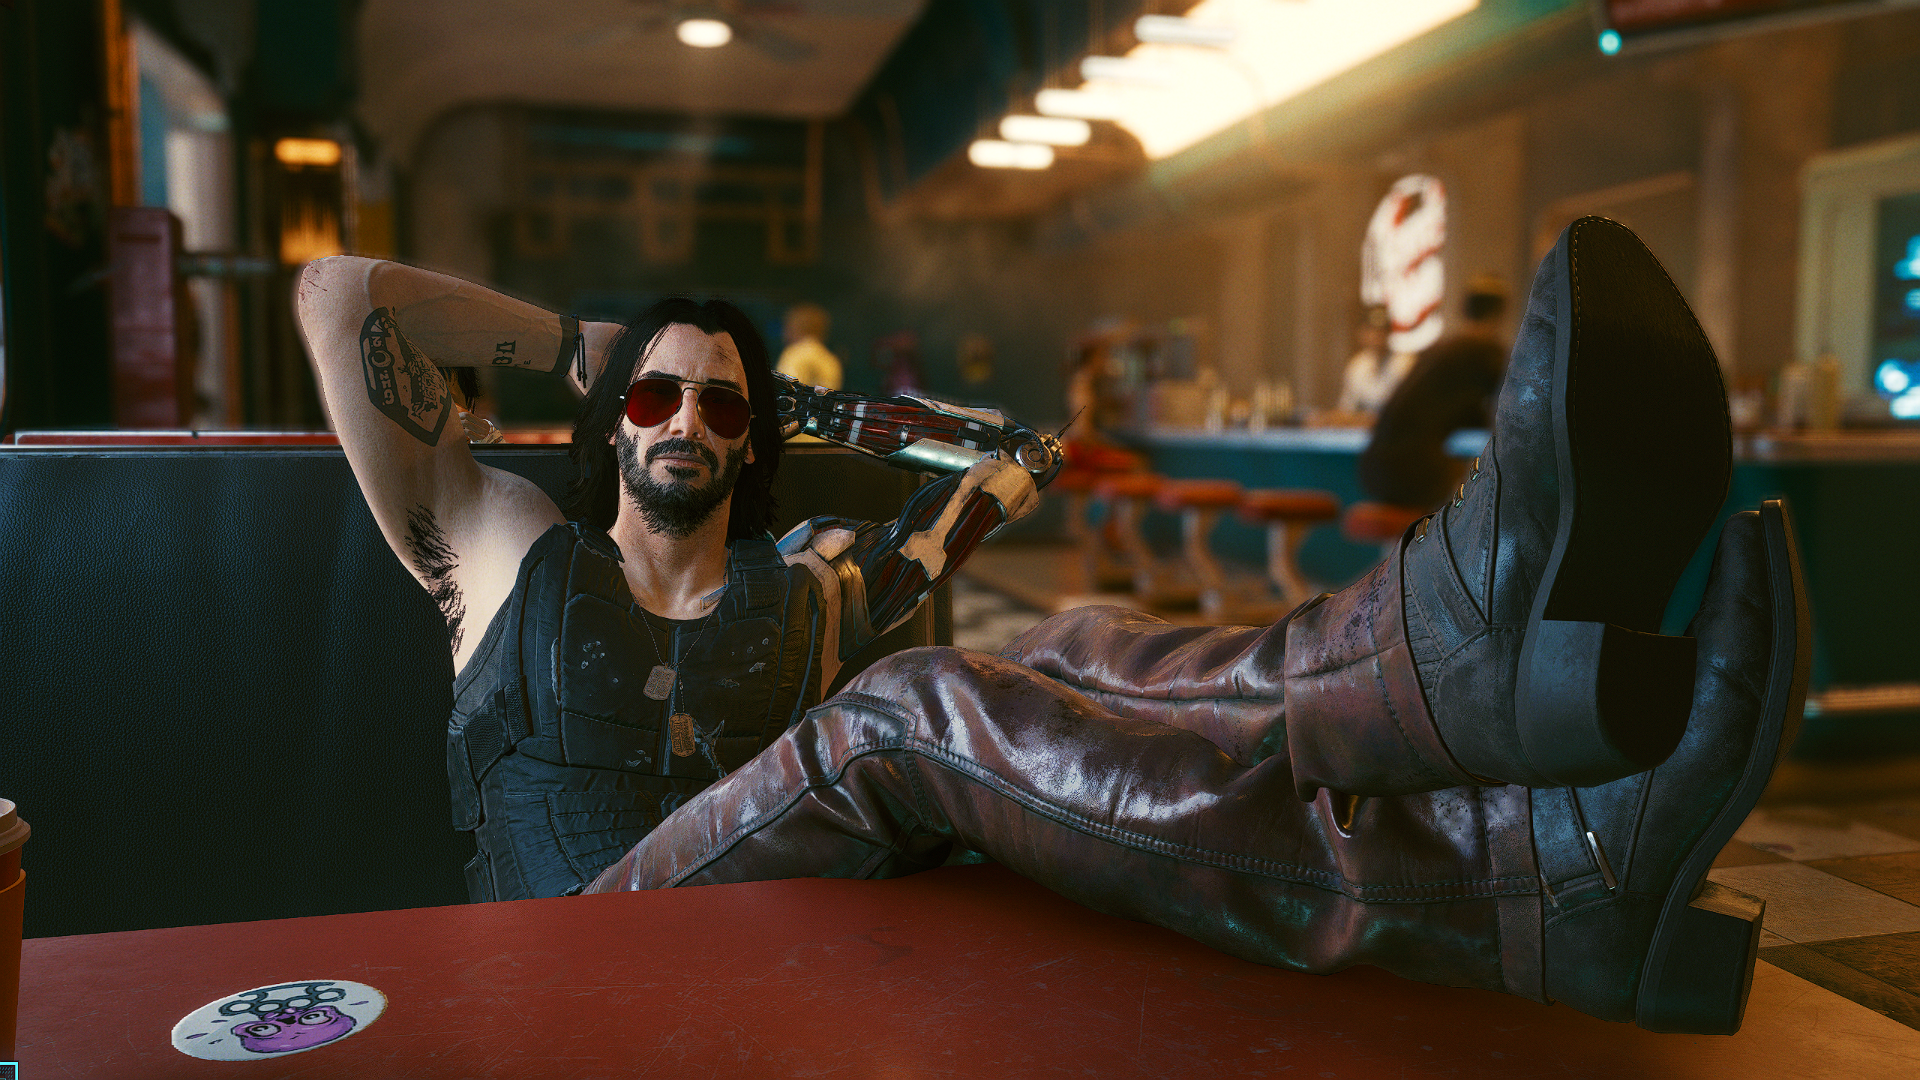 General 1920x1080 Keanu Reeves video games entertainment Cyberpunk 2077 Johnny Silverhand CD Projekt RED actor video game characters